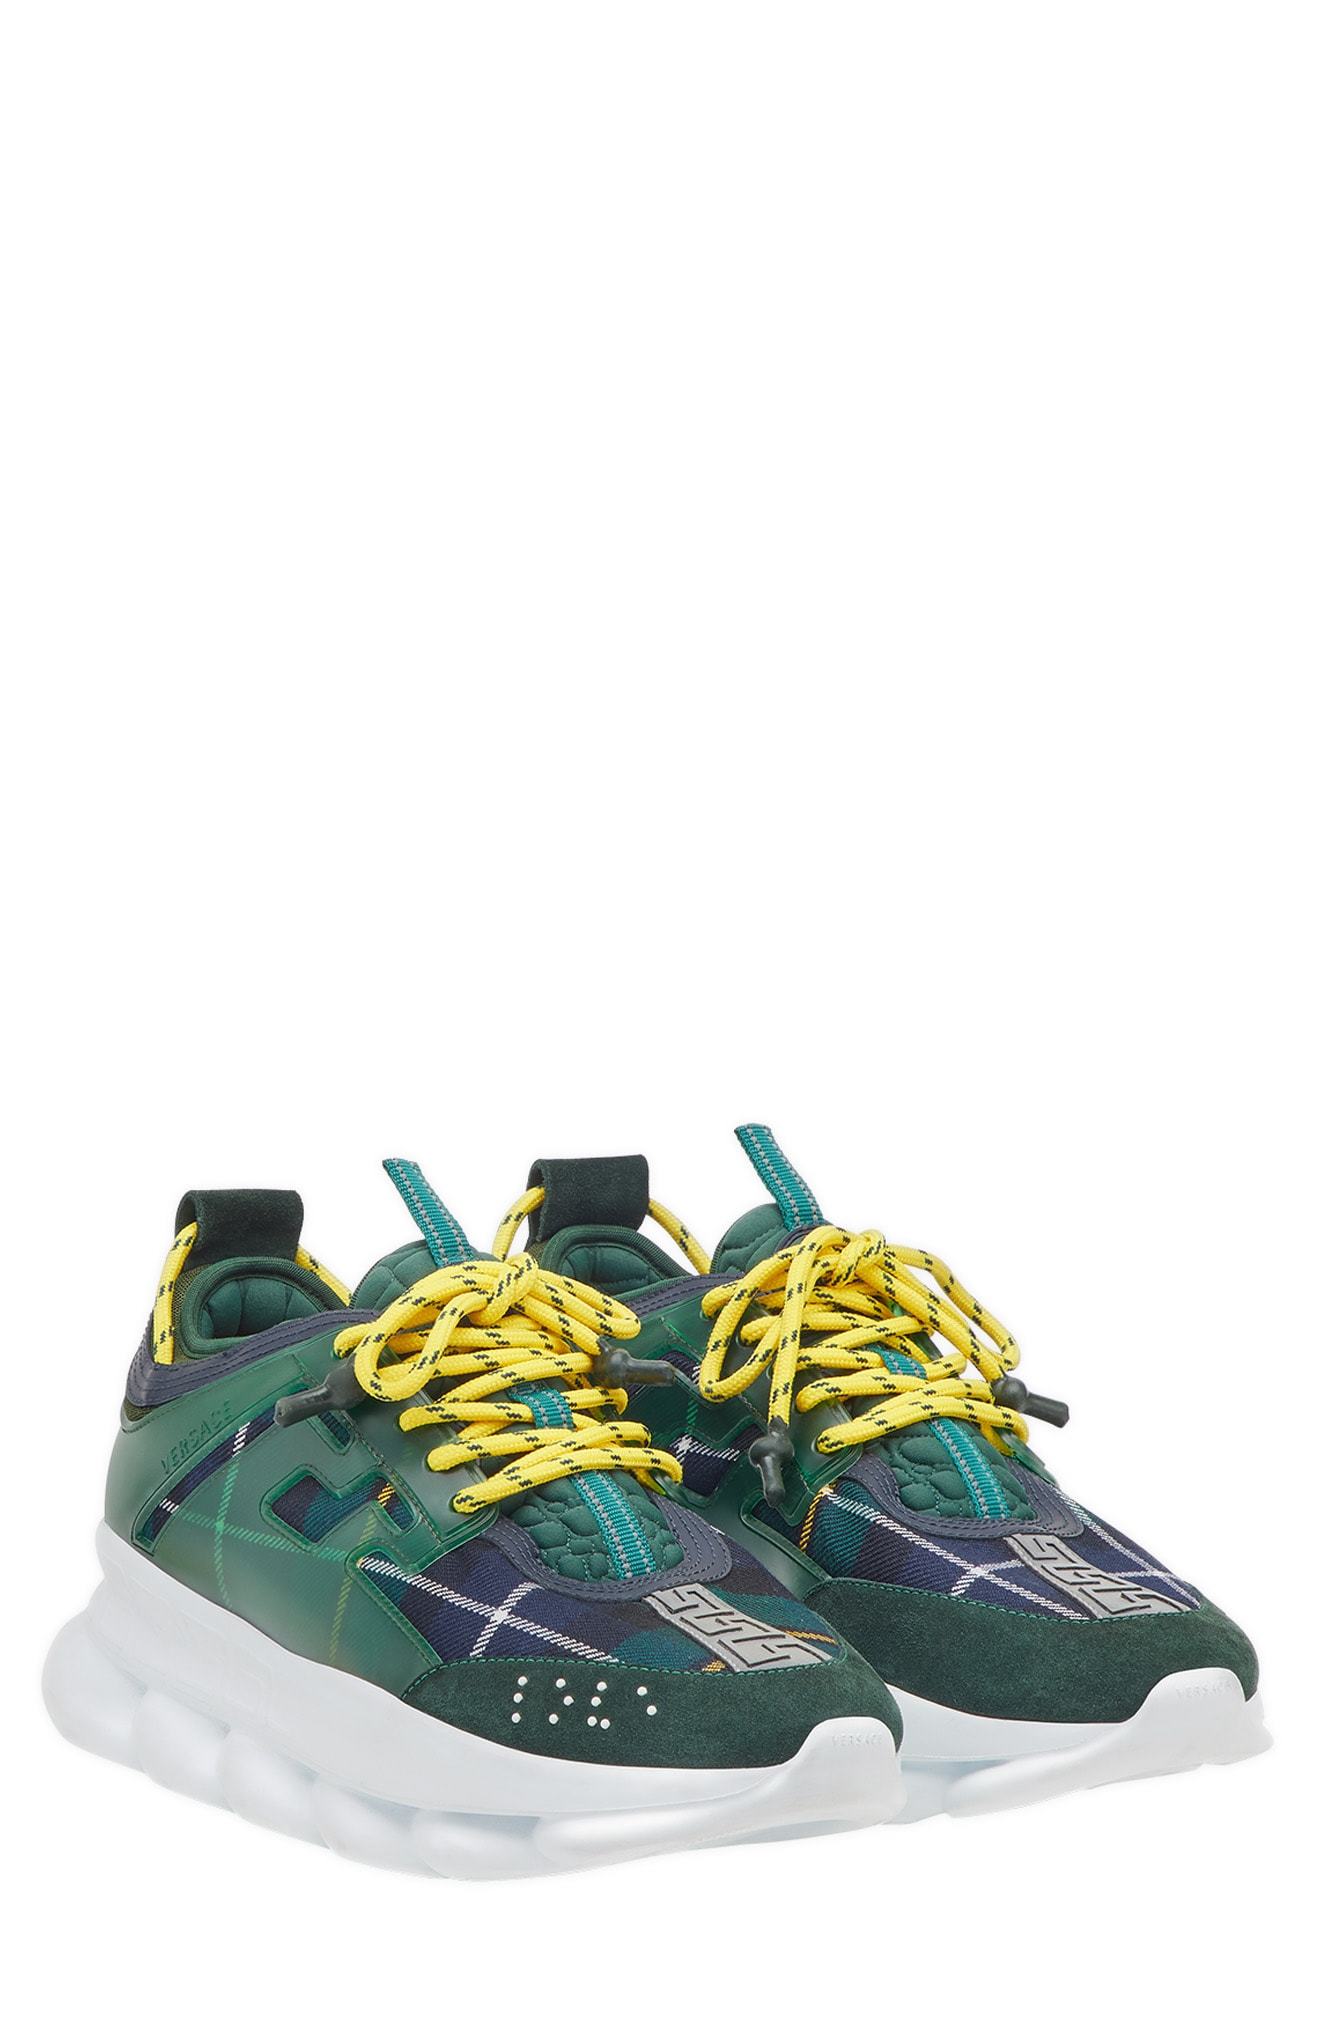 Versace Chain Reaction light mesh sneakers - ShopStyle